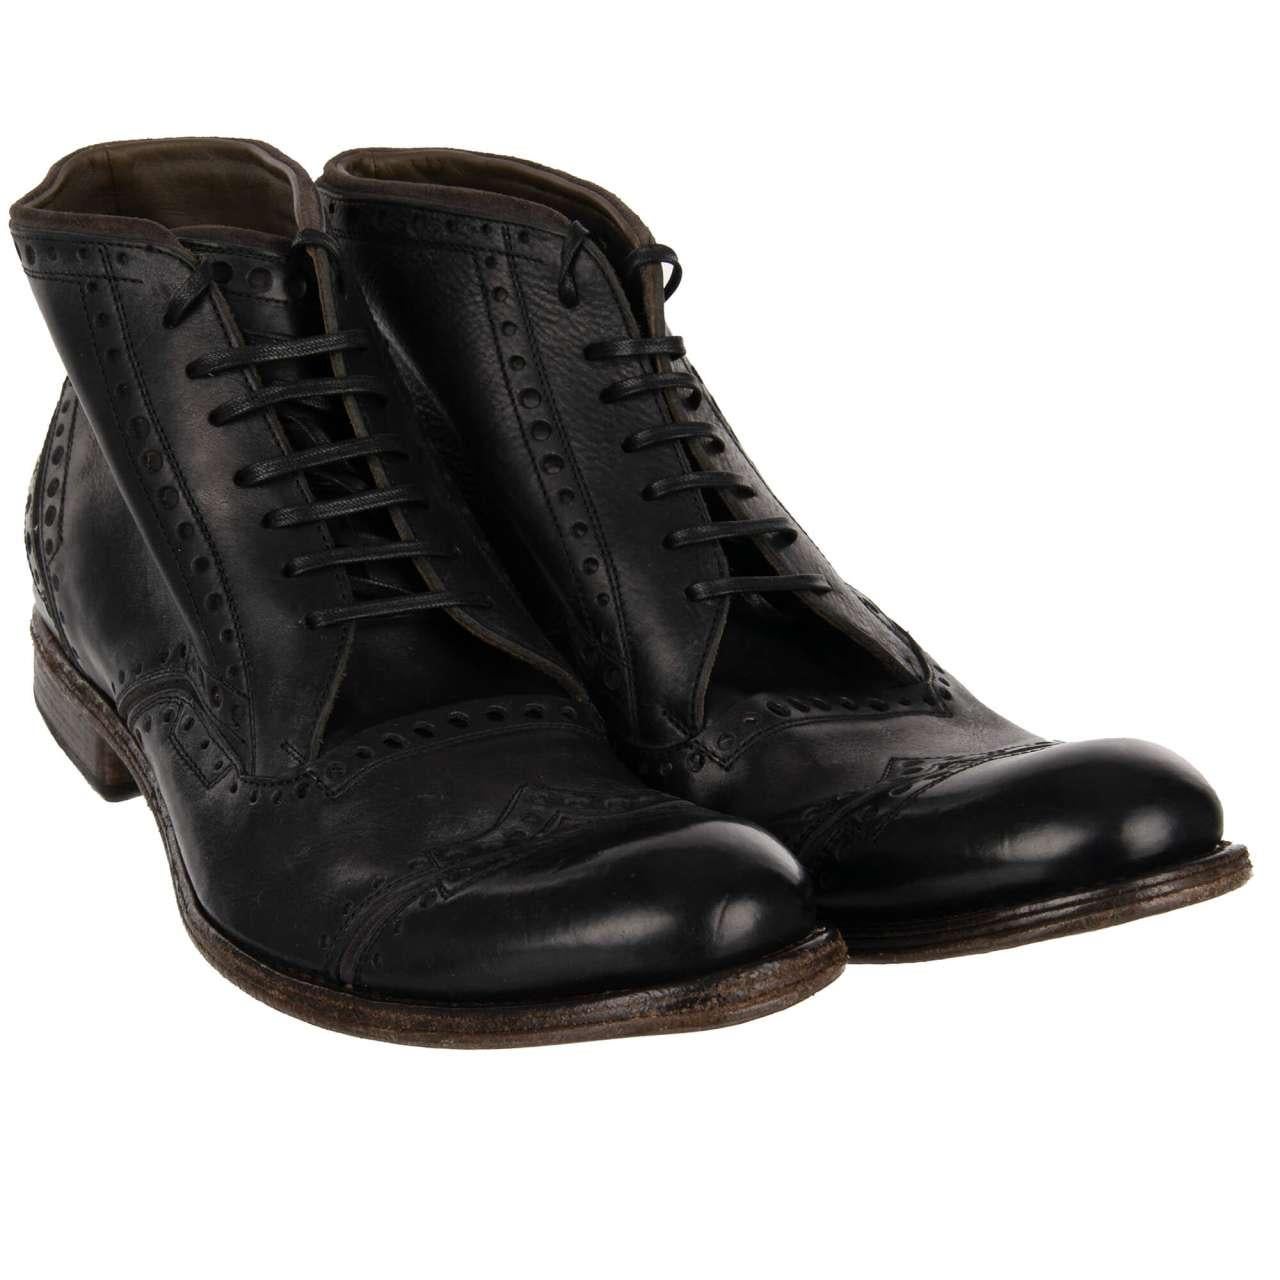 - Curved Ankle Boots SIRACUSA made of leather and cut-outs decorations in black by DOLCE & GABBANA - MADE IN ITALY - Former RRP: EUR 795 - New with Box - Model: CA6261-AP109-80999 - Material: 100% Calfskin - Sole: Leather - Color: Black - Height: